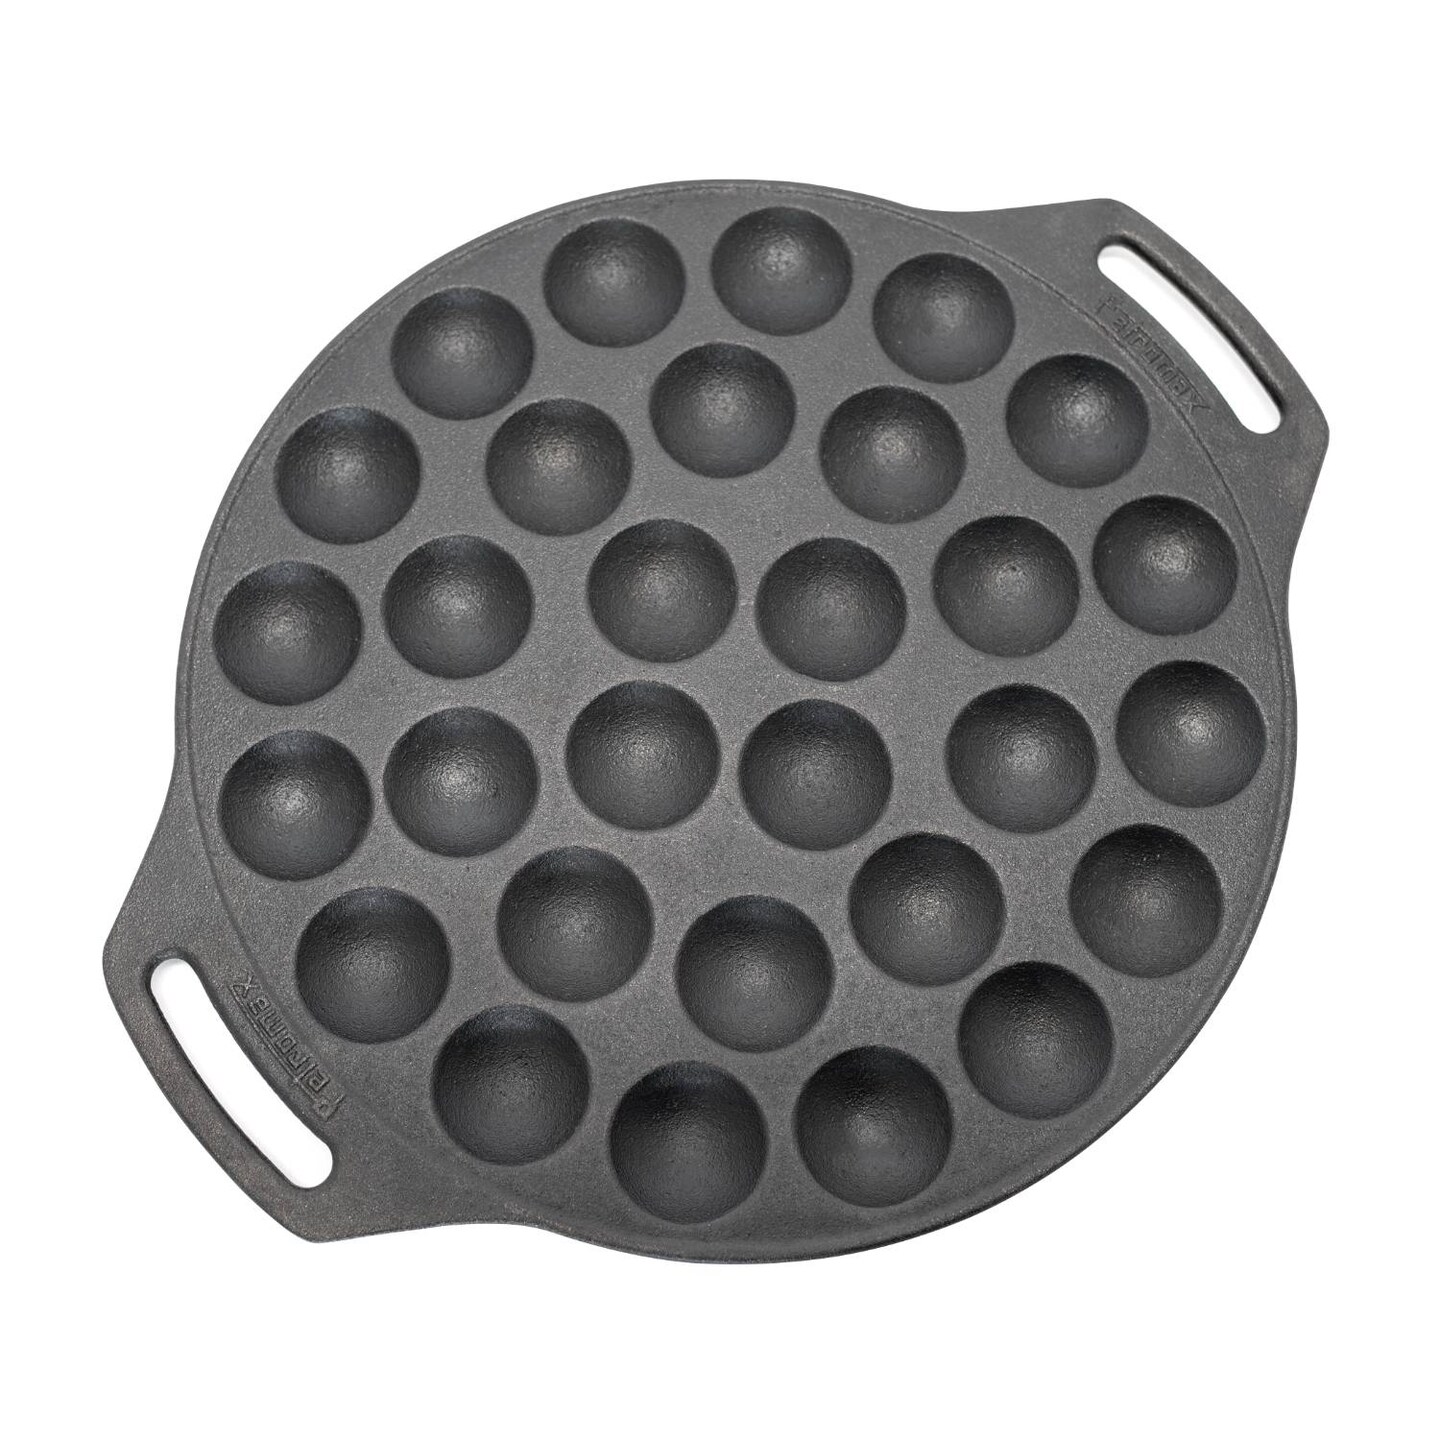 Petromax Cast Iron Poffertjes Pan for Hygge Kitchen or Camping, Ebelskivers/Aebleskivers Griddle Cookware Conducts Heat Evenly